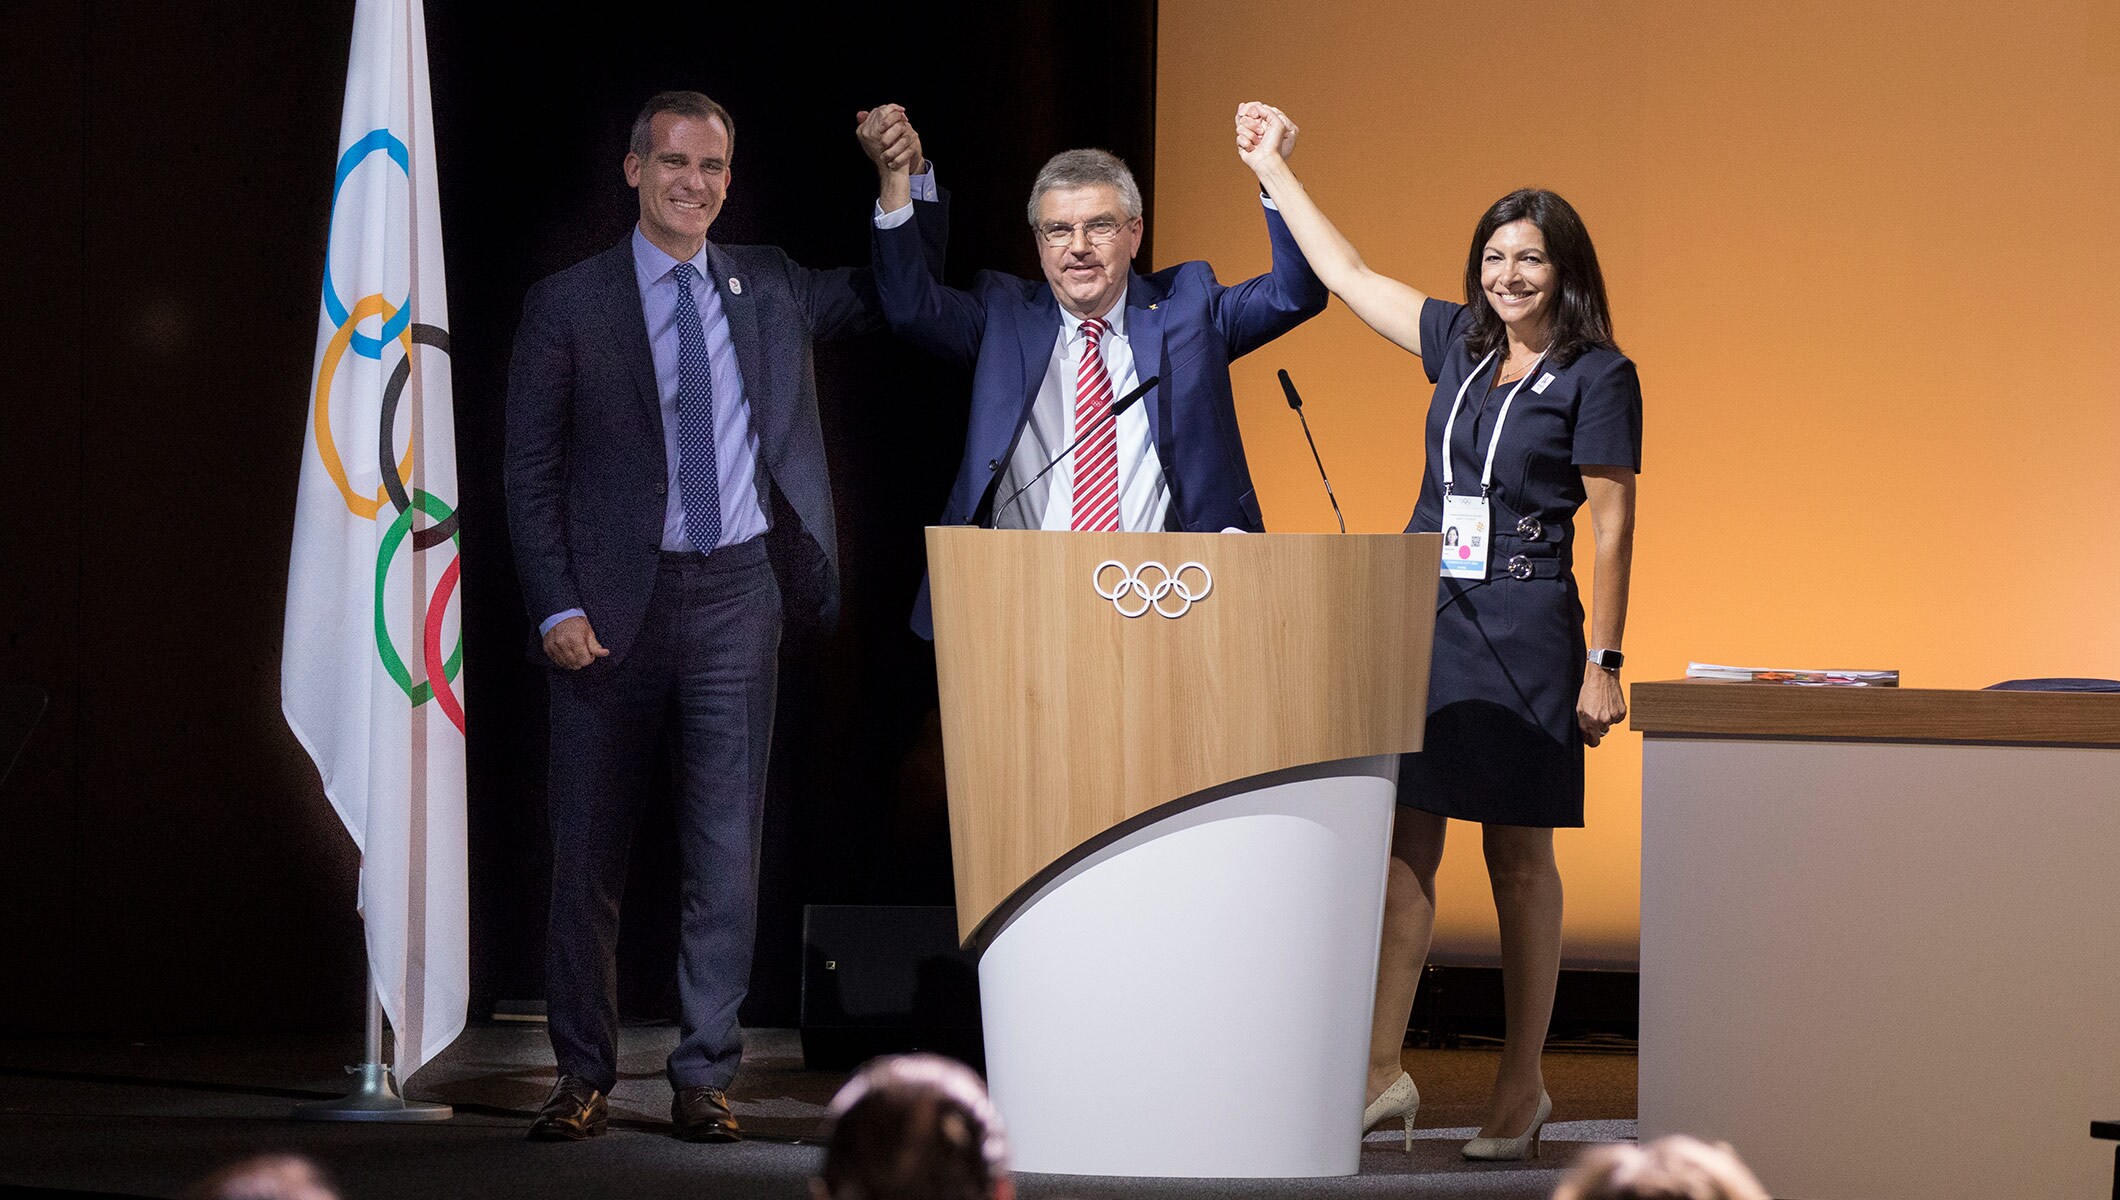 IOC makes historic decision in agreeing to award 2024 and 2028 Olympic